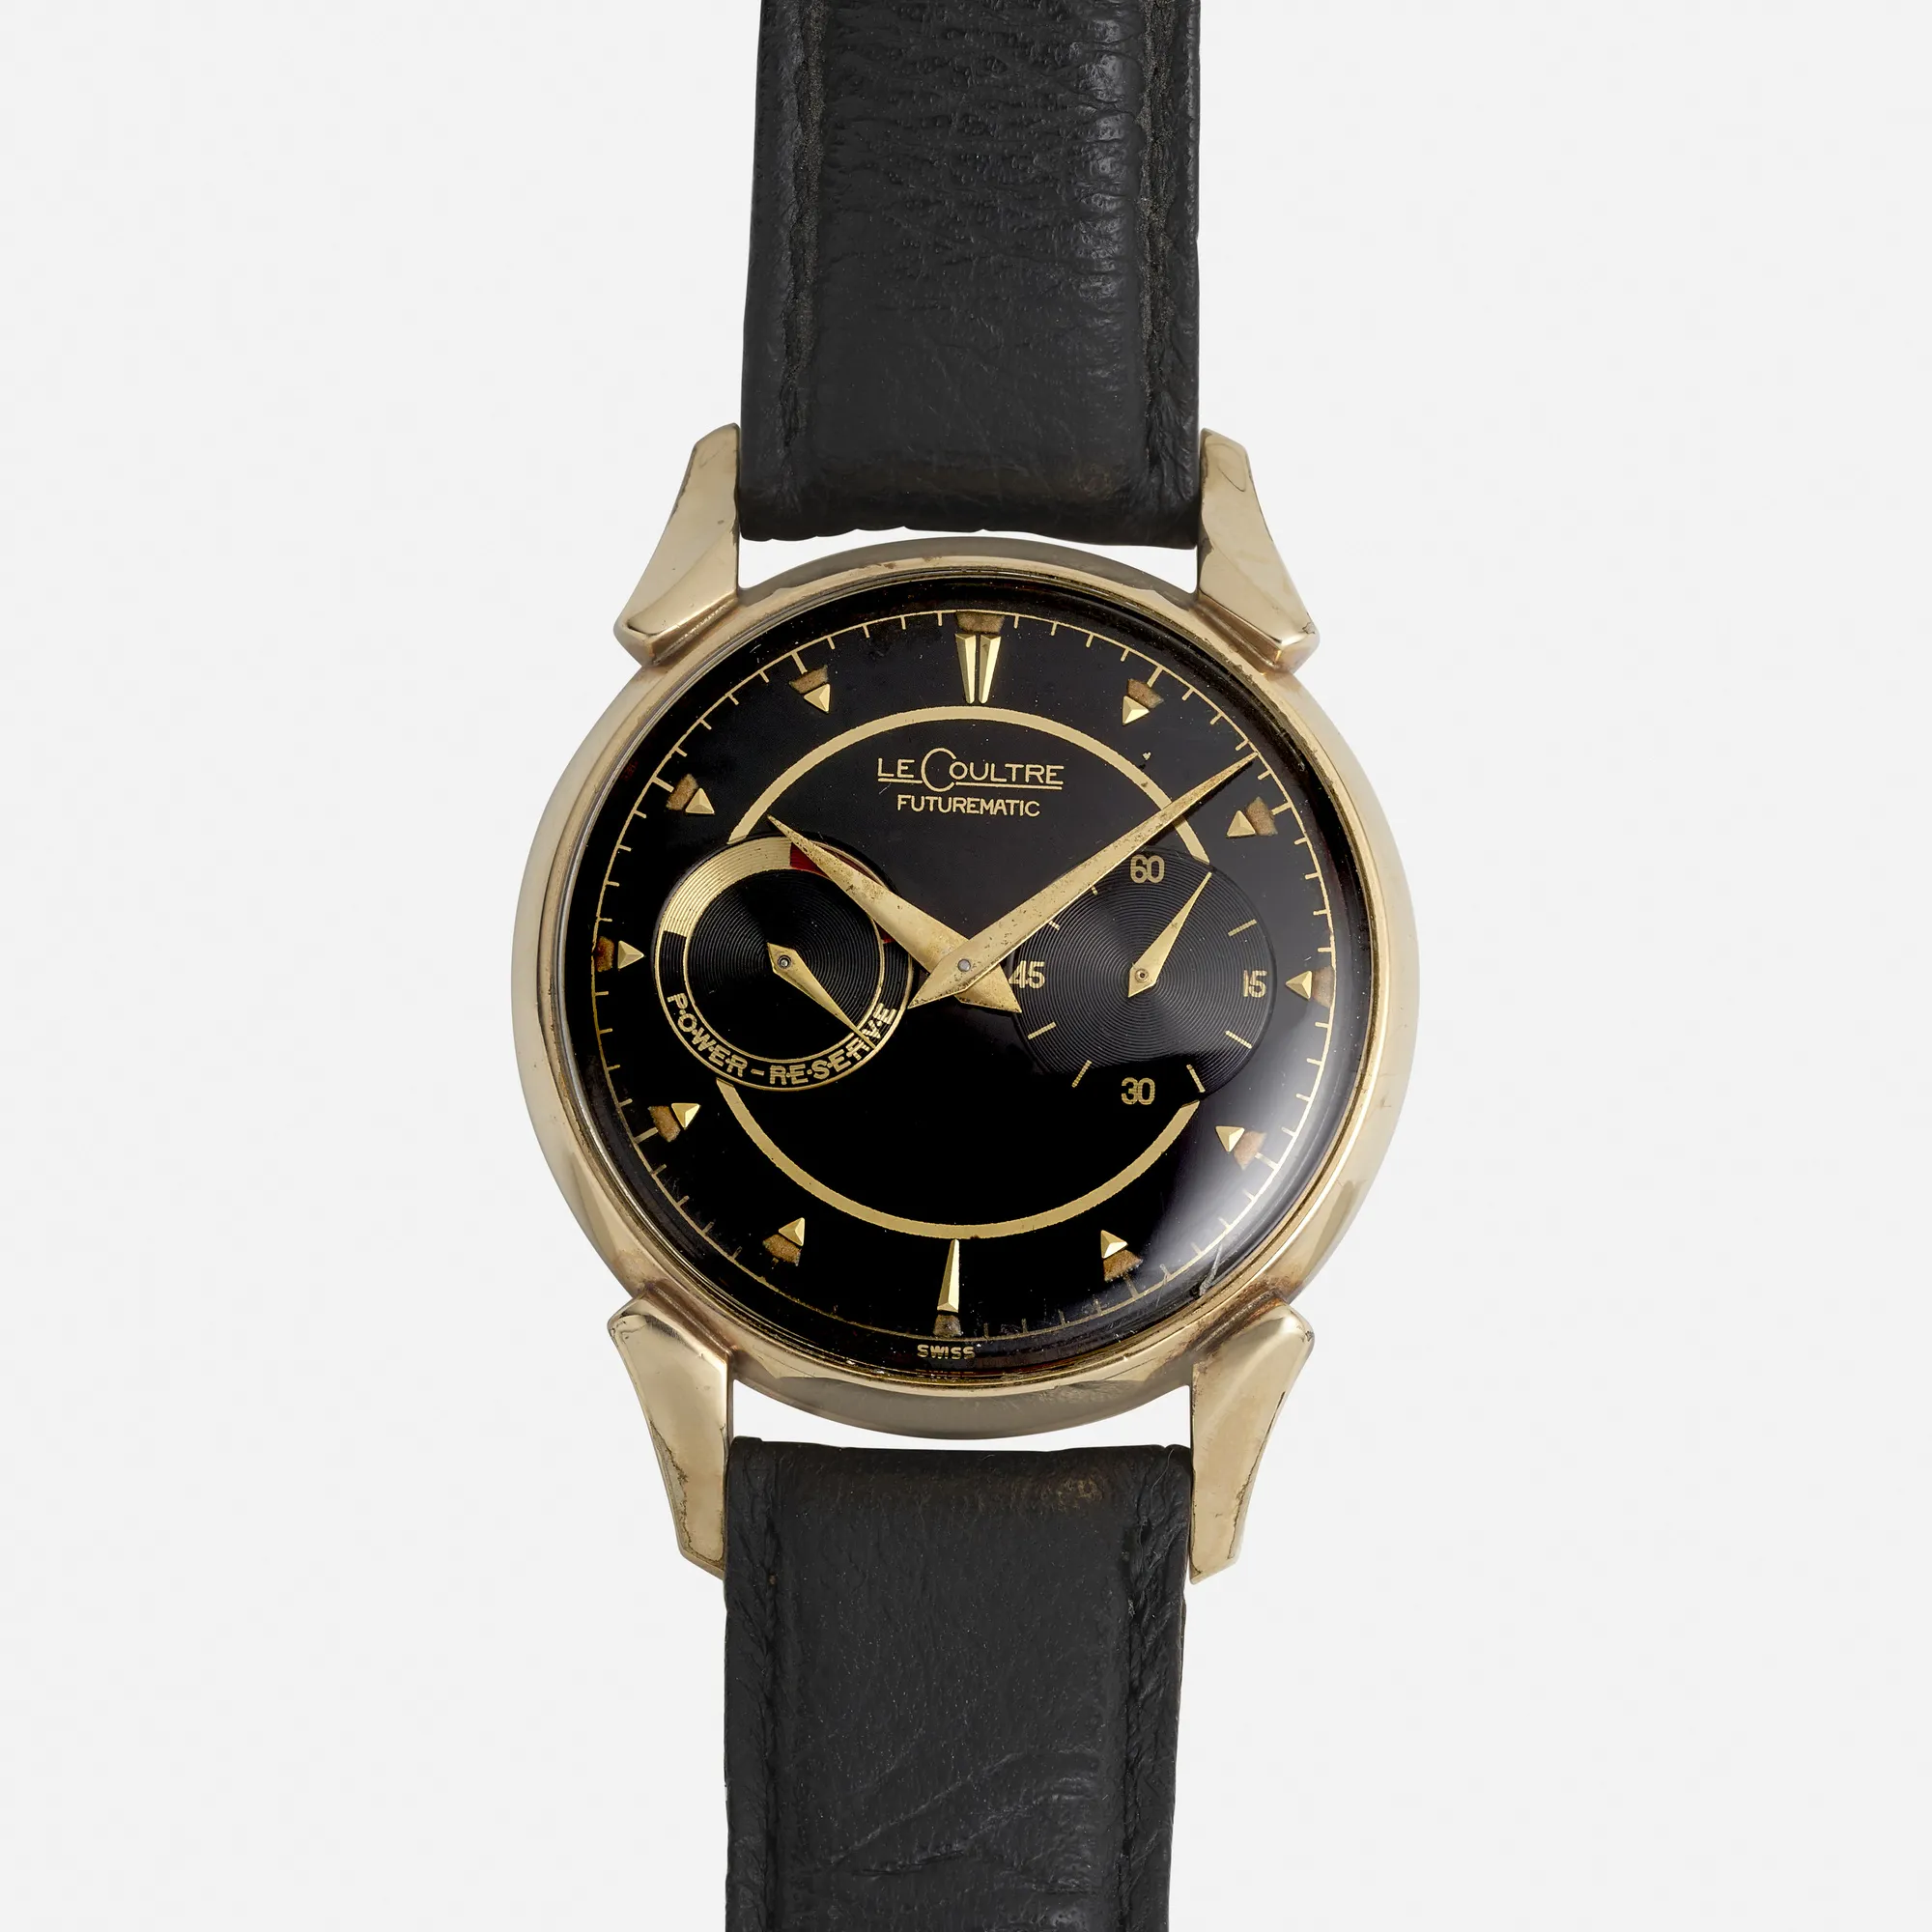 Jaeger-LeCoultre Futurematic 44mm Gold-plated Black